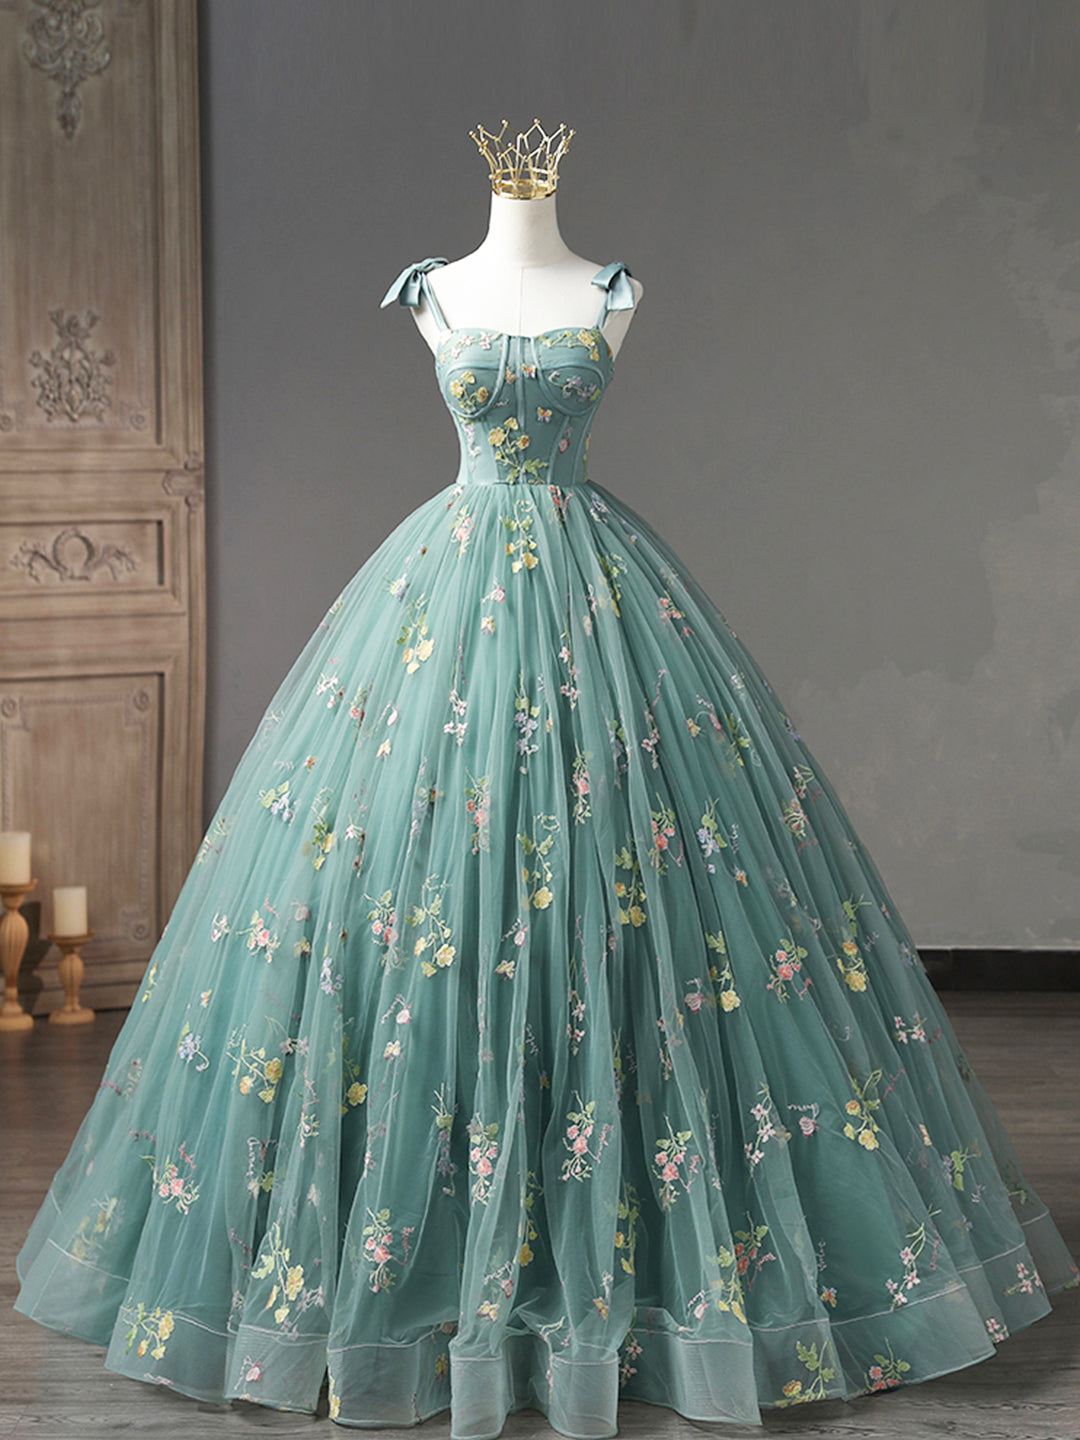 Green Floral Tulle Long Prom Dress, Cute Off Shoulder Evening Party Dress